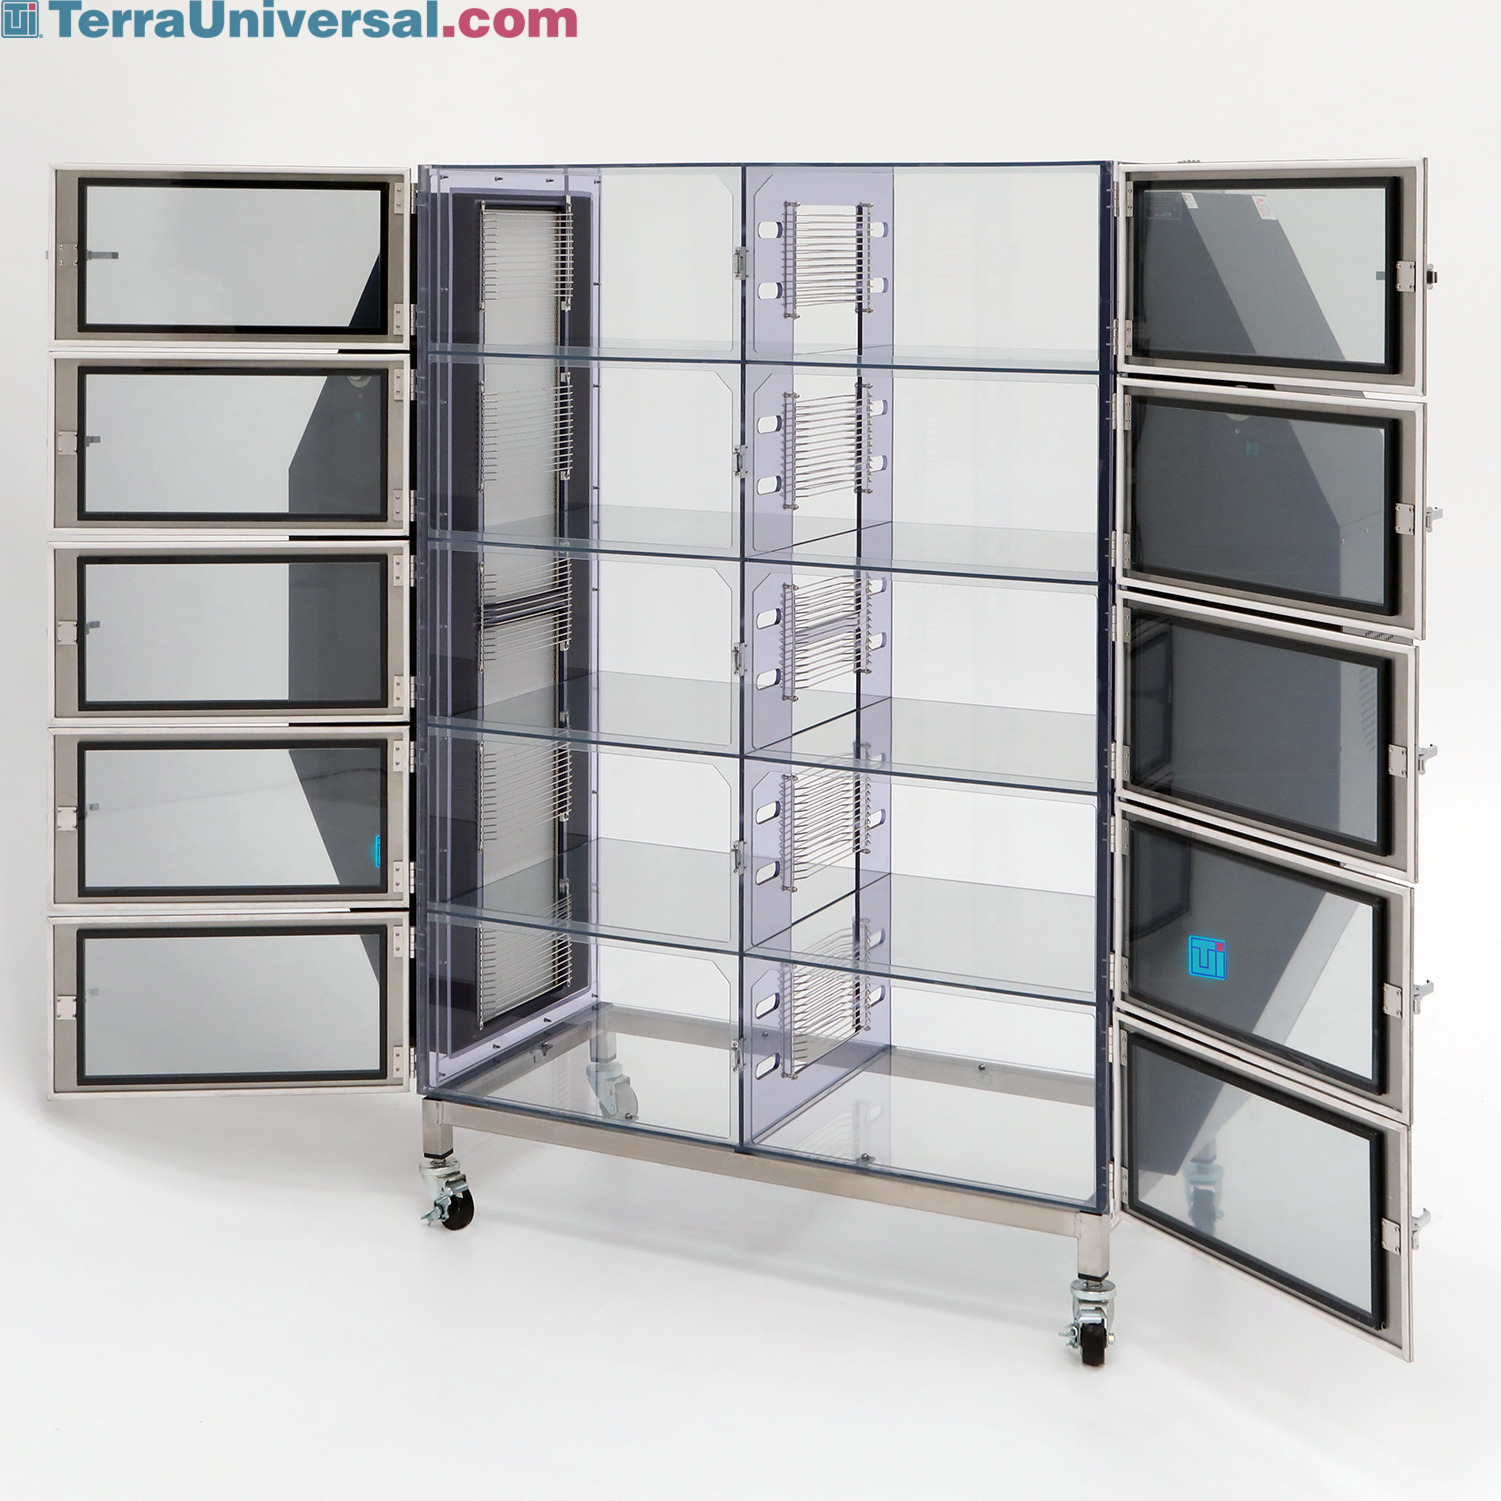 Polypropylene Storage Cabinet with Static Dissipative Doors 37 x 24 x 60  - Four Shelves